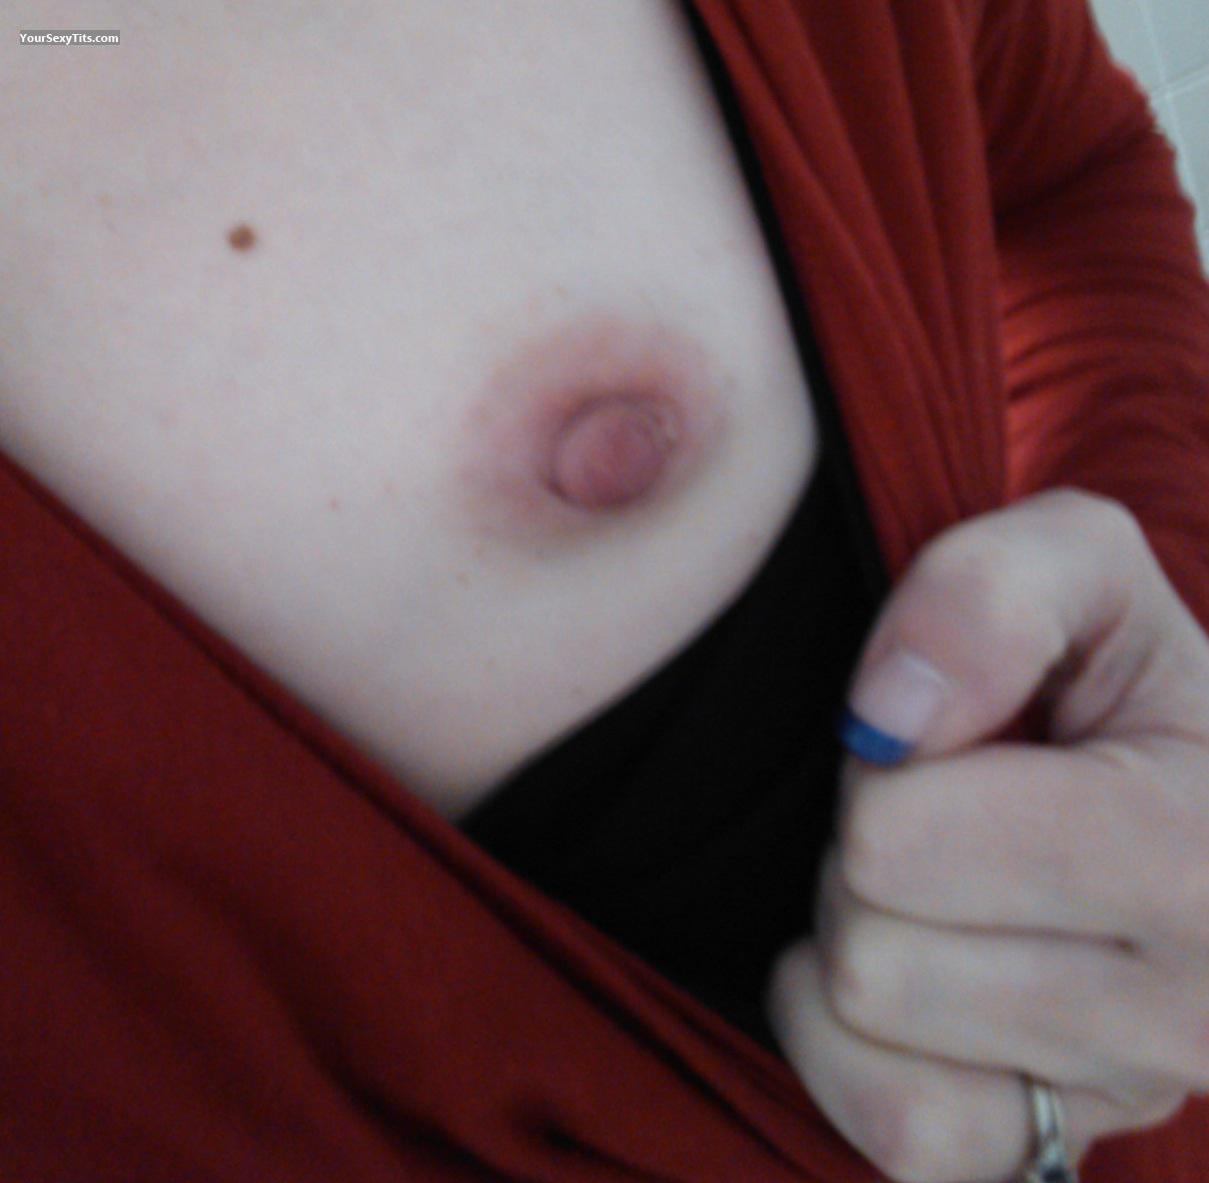 Tit Flash: My Coworker's Very Small Tits (Selfie) - Little S from United States